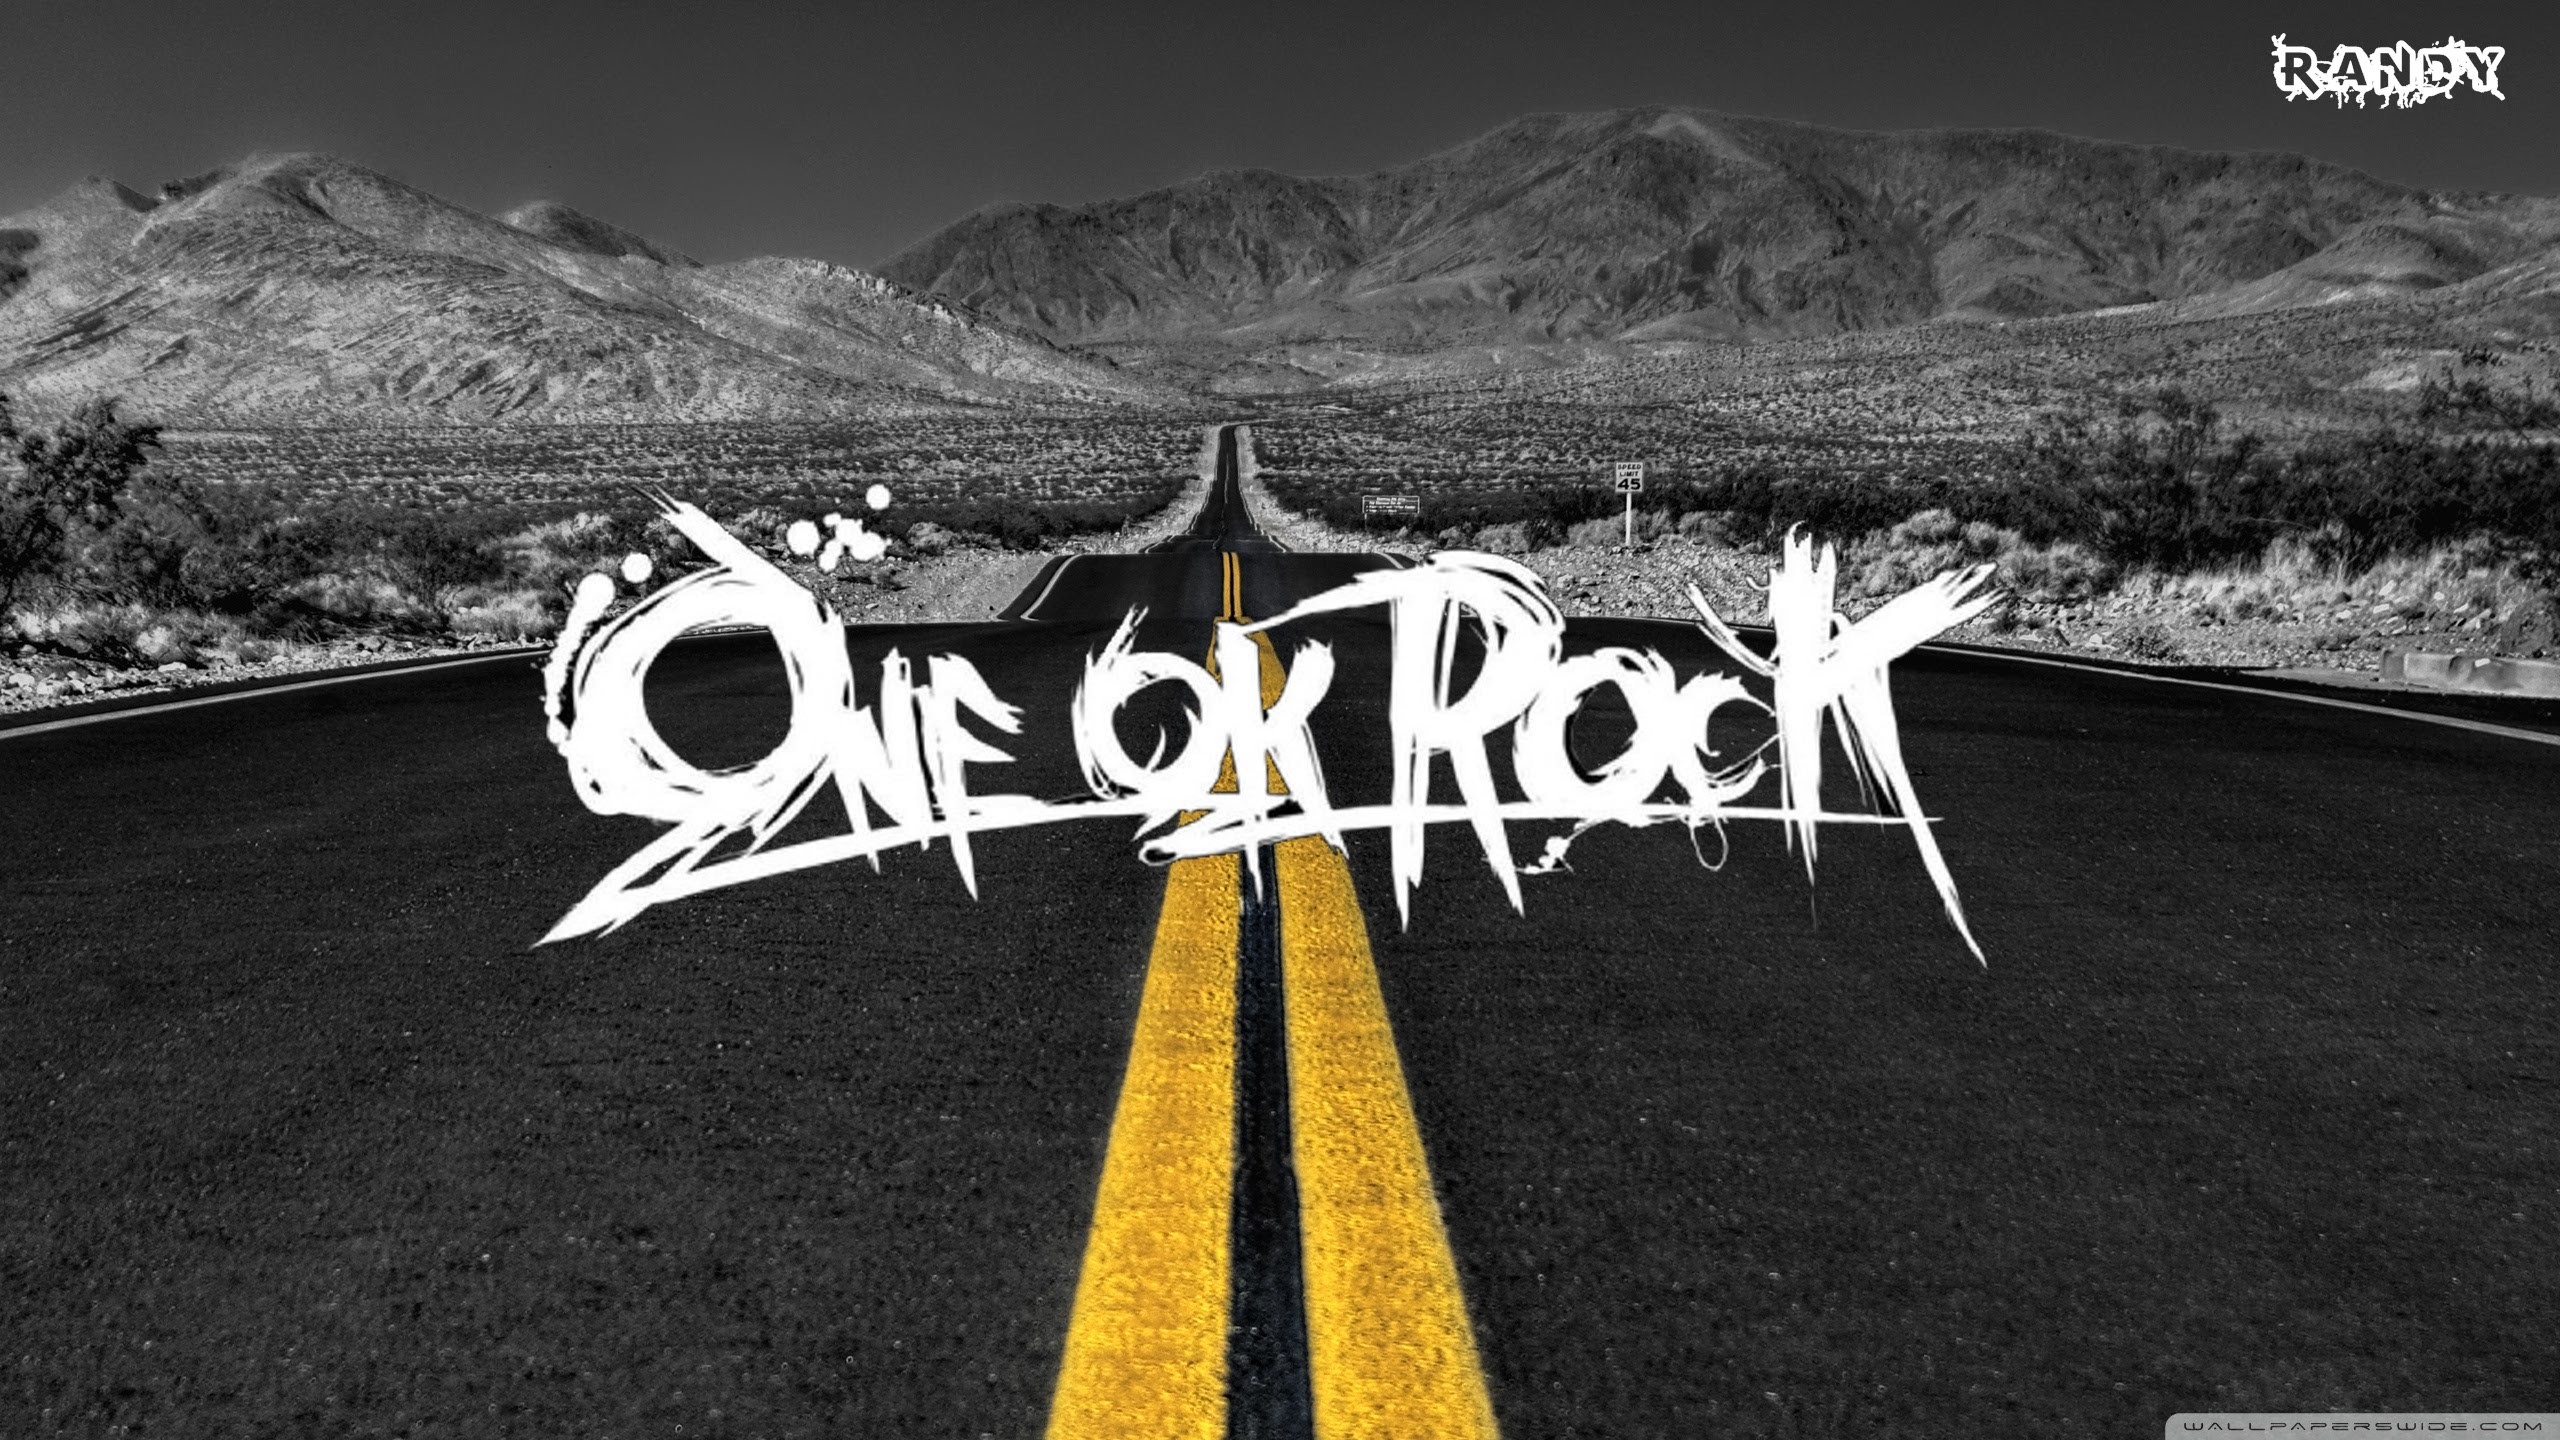 Download Wallpaper Android One Ok Rock Wallpaper Hp